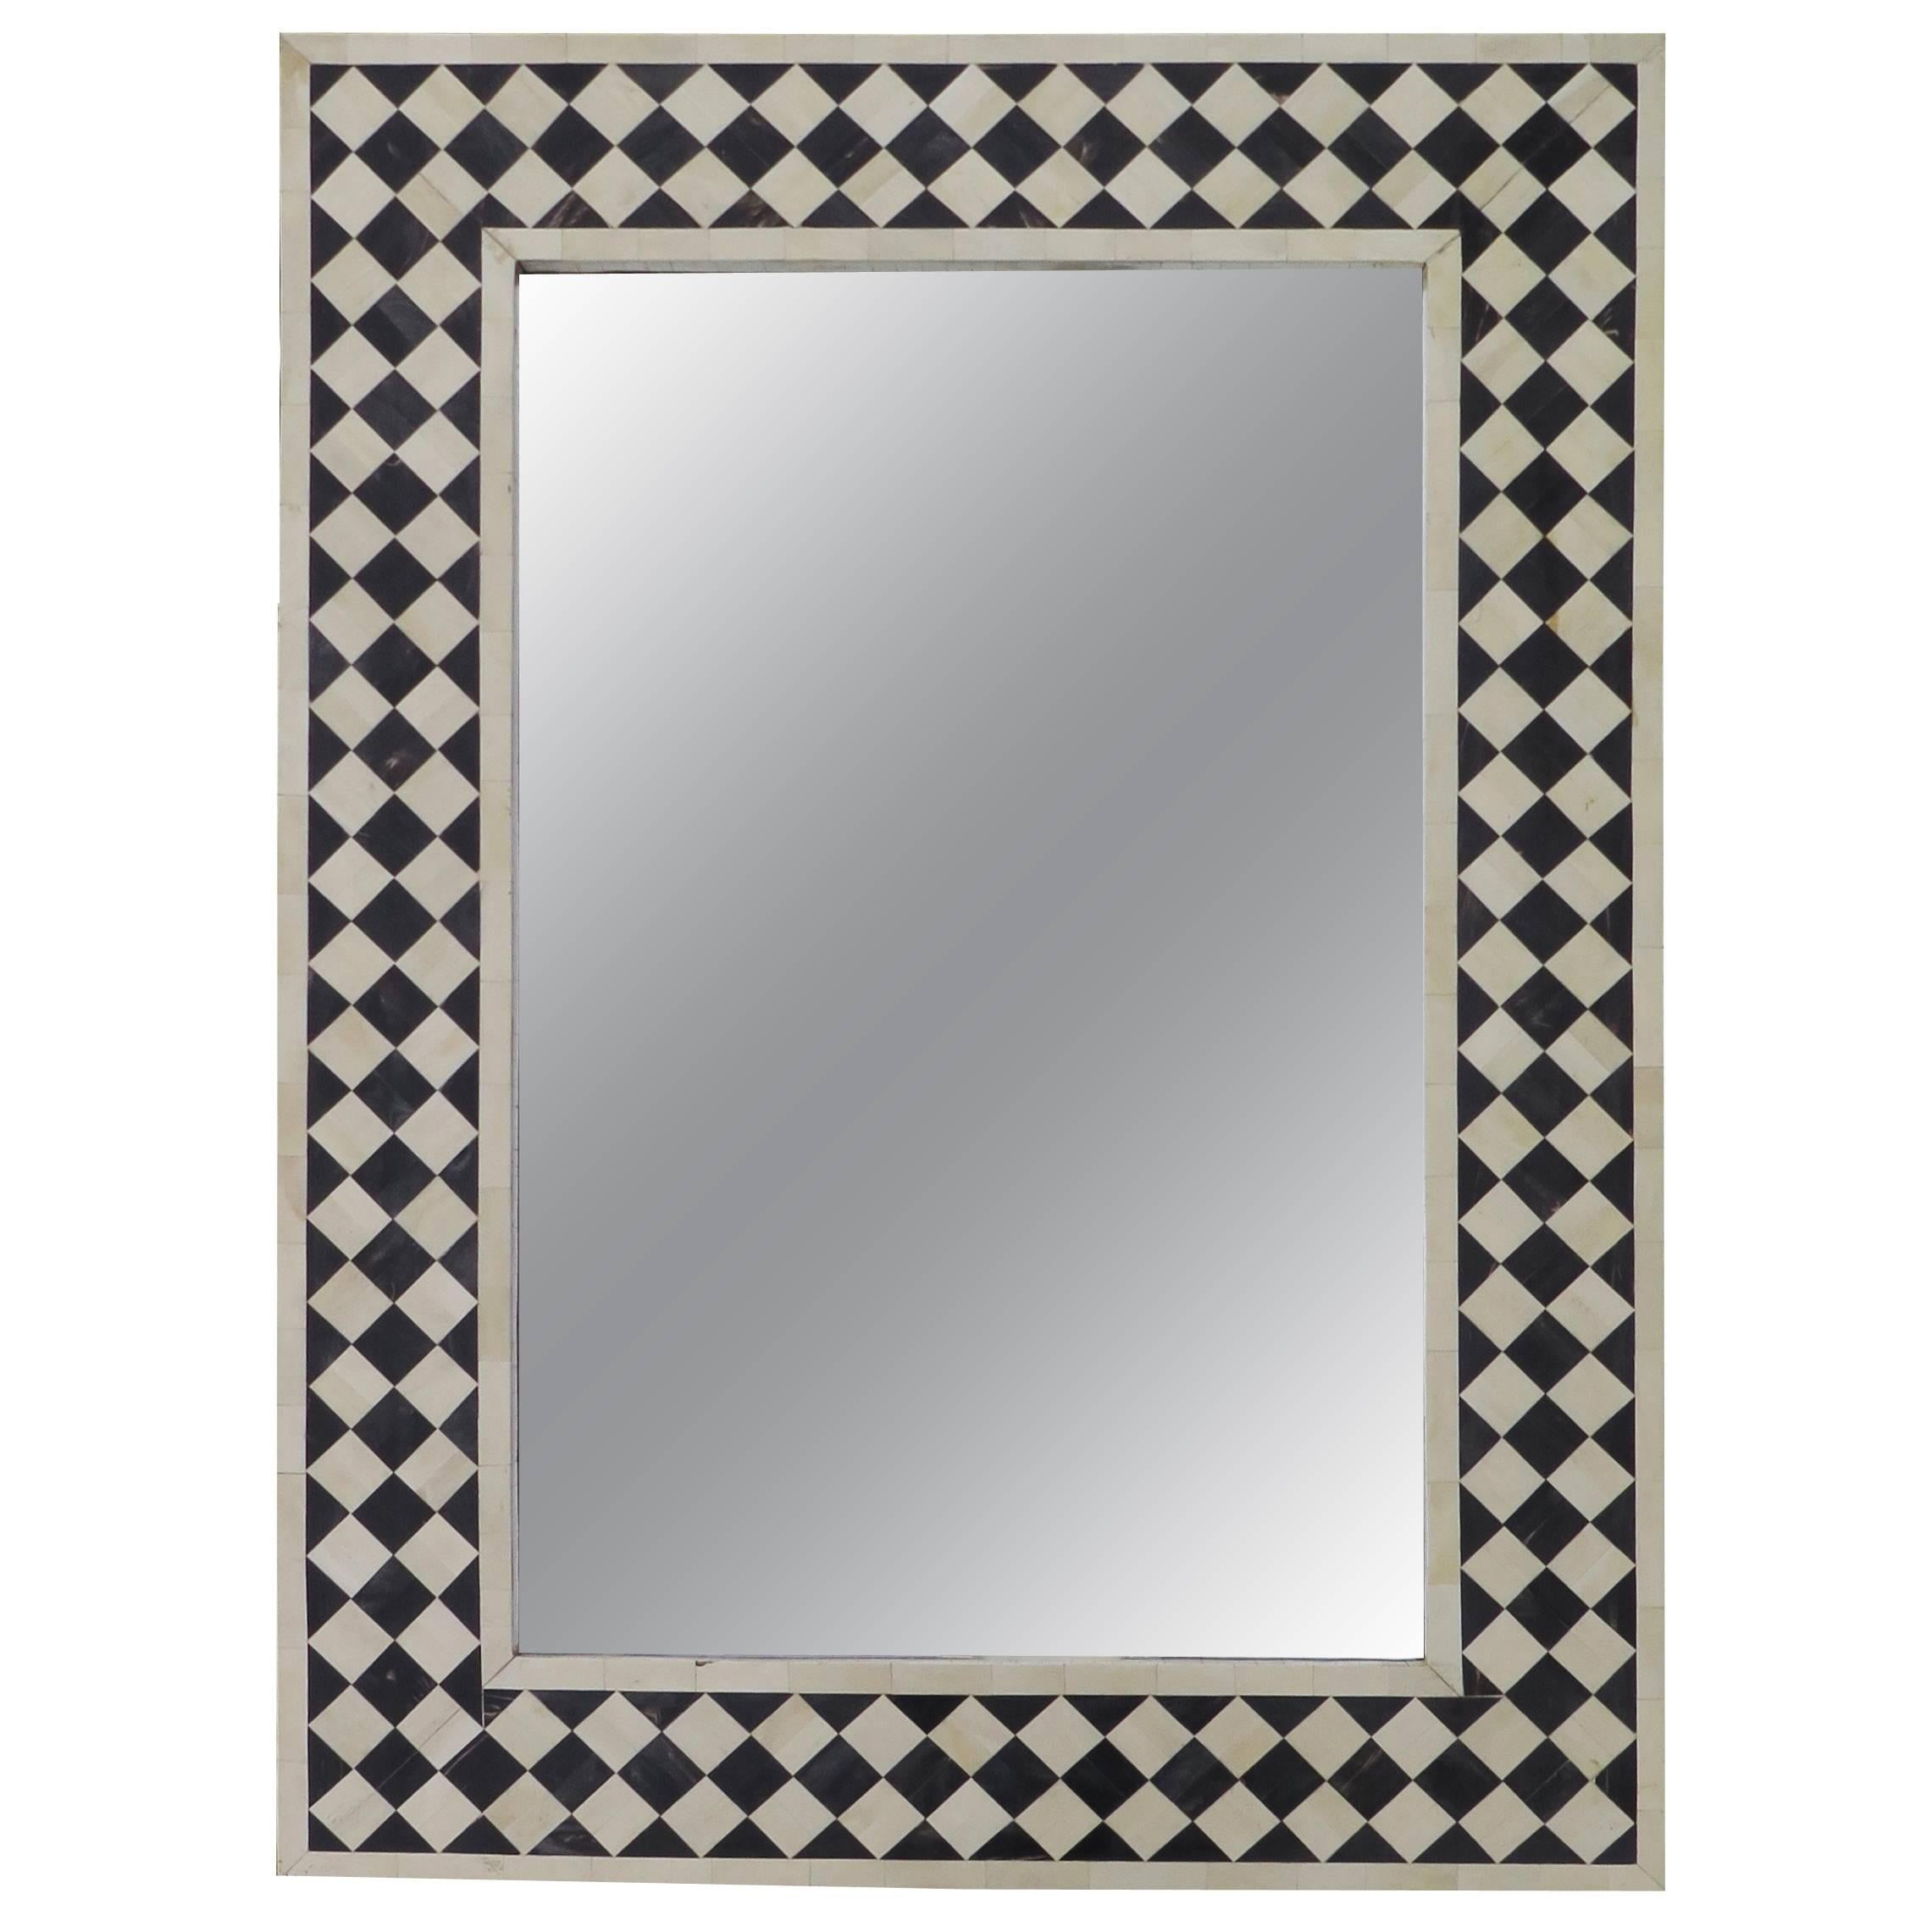 Anglo-Indian Black and White Bone Inlay Mirror Checkerboard Design For Sale